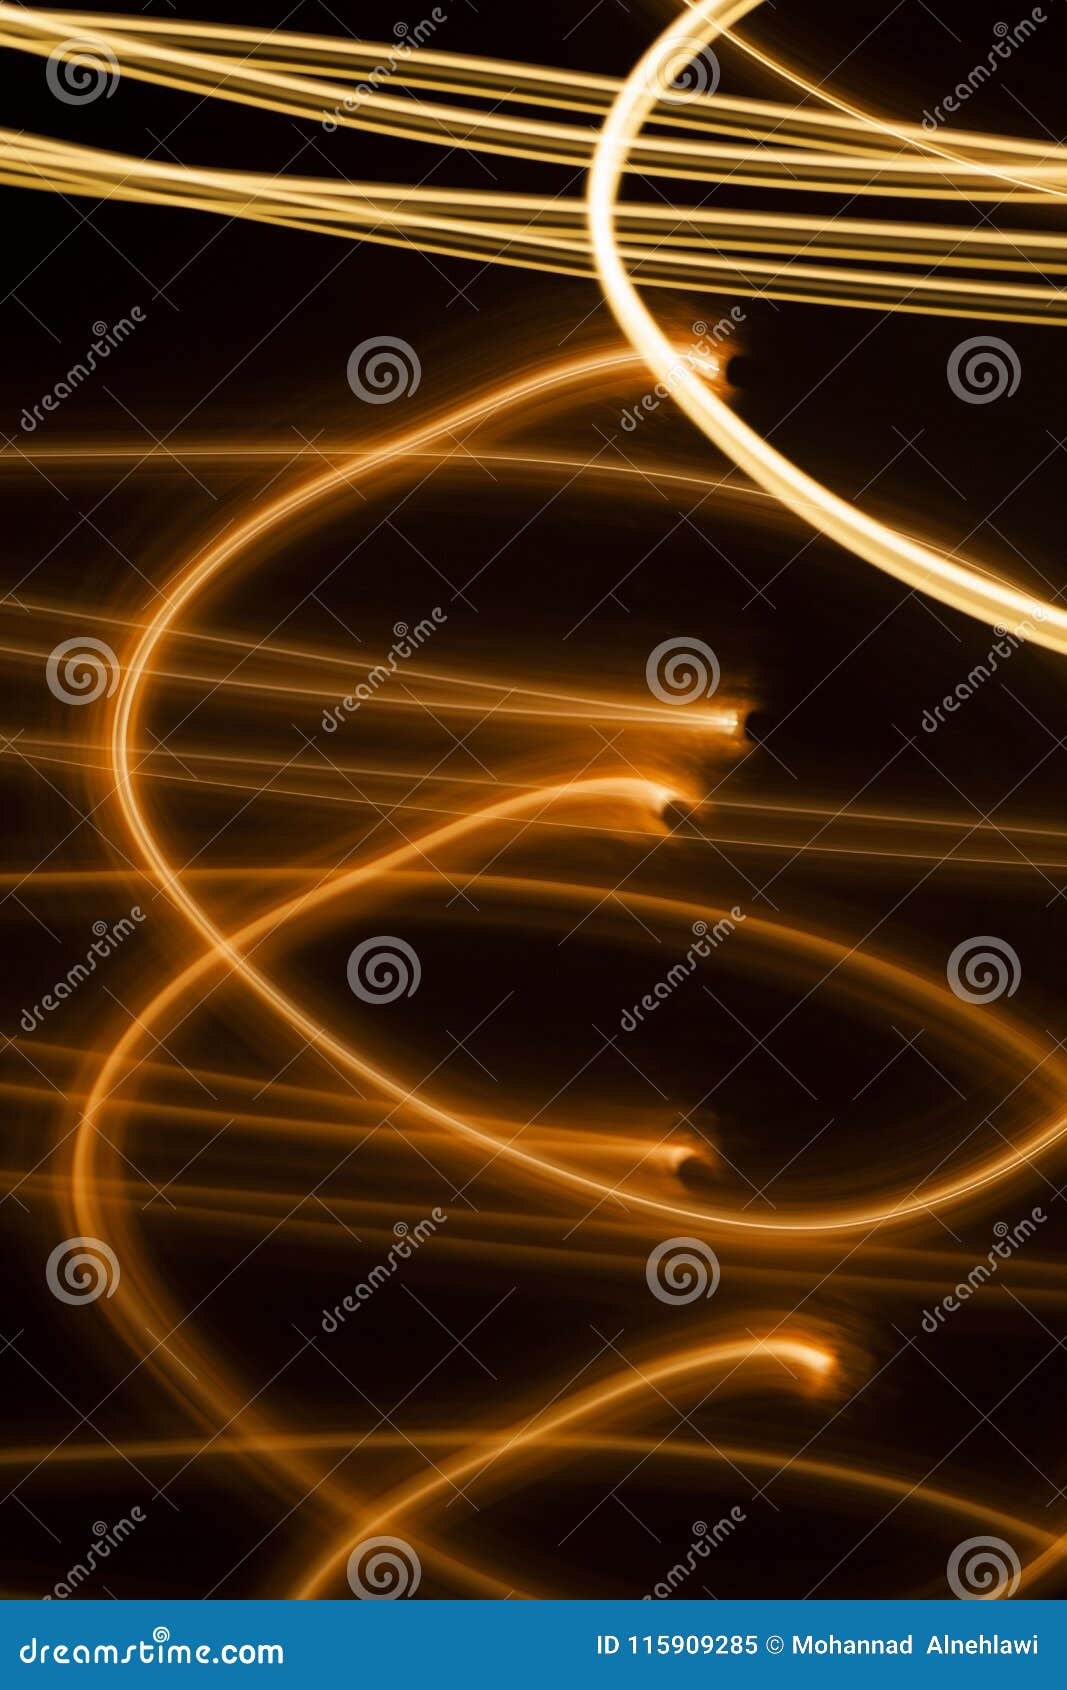 Swirl Sparkling Glowing Lines Background Stock Image - Image of swirl ...